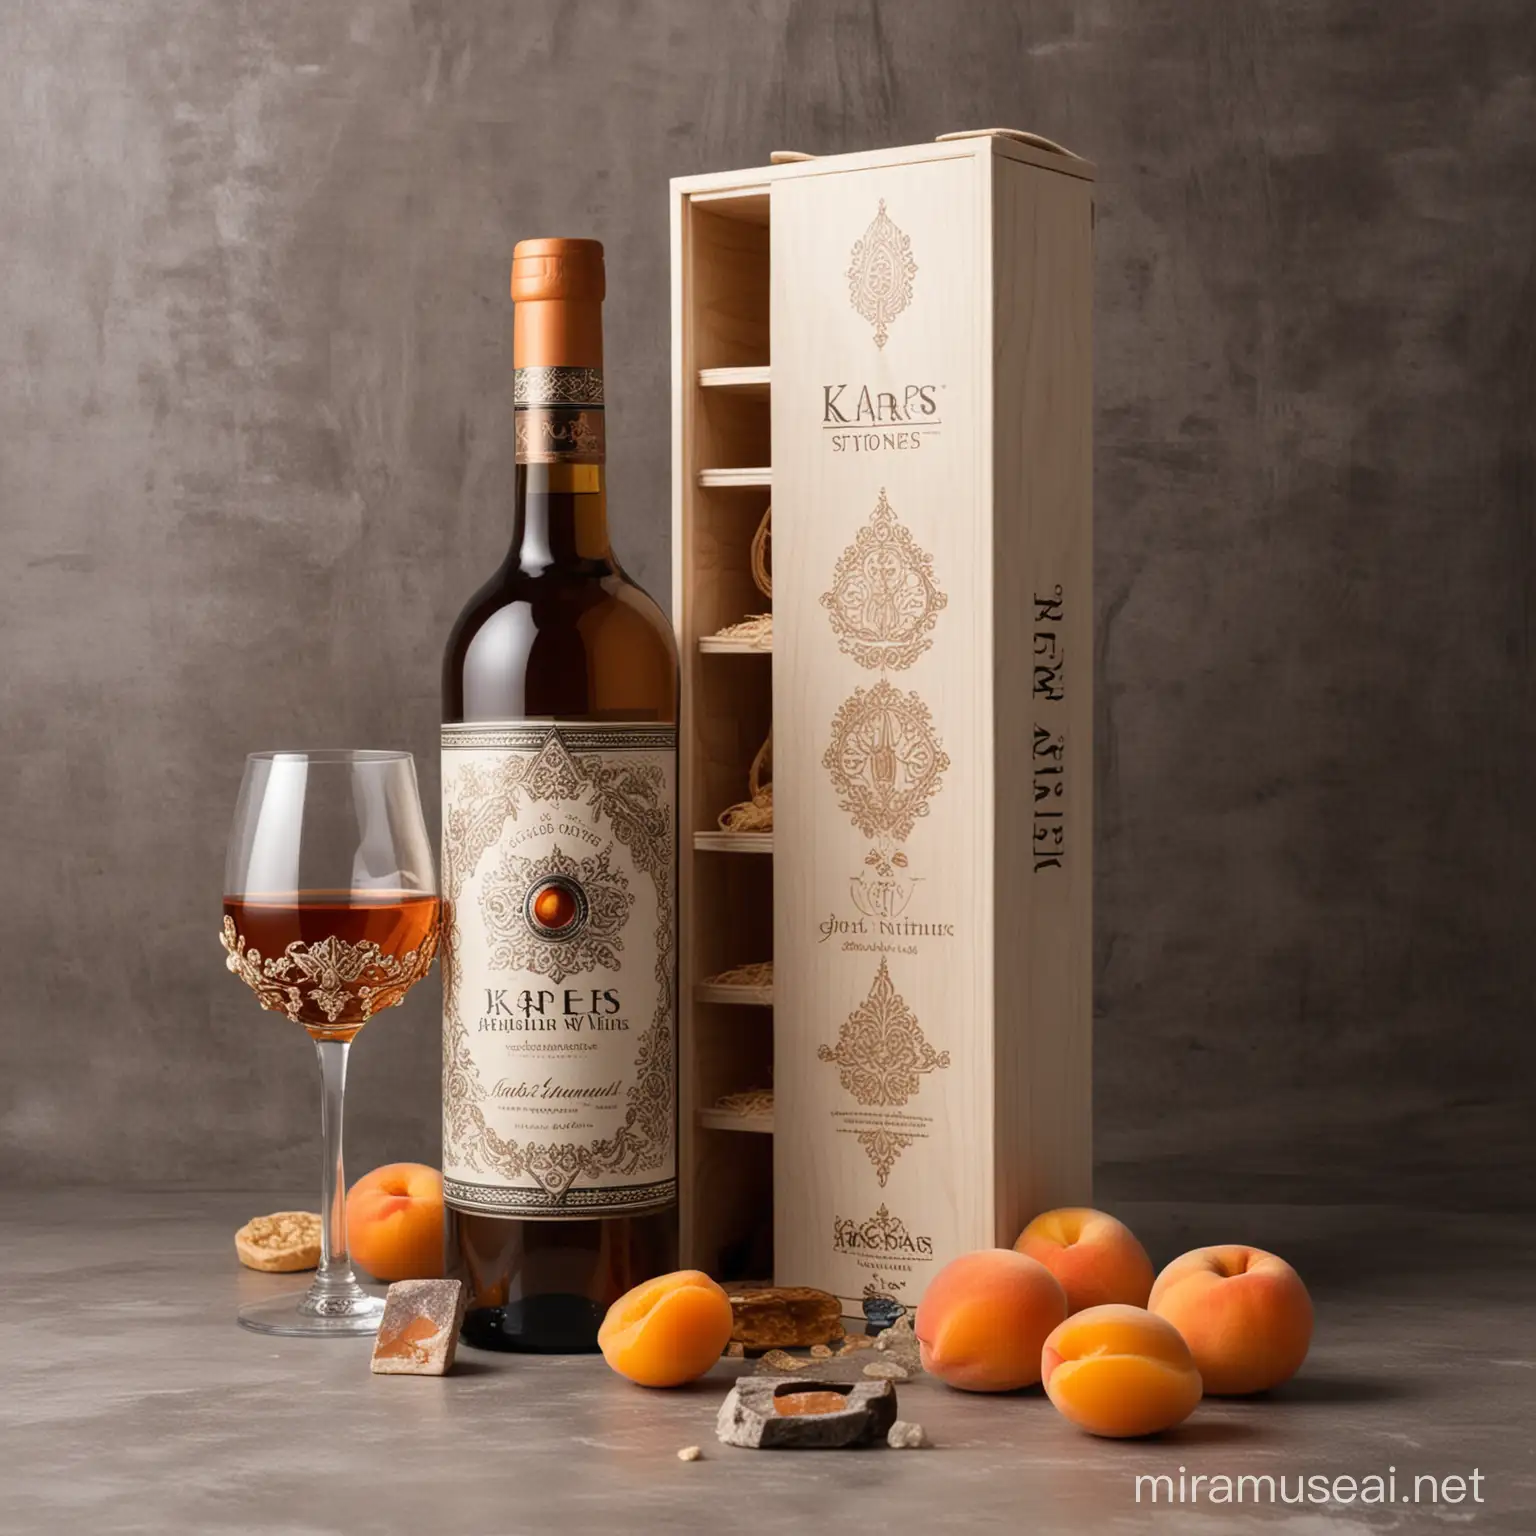 Elegant KARS Apricot Wine Modern Bottle and Packaging with Armenian Flair